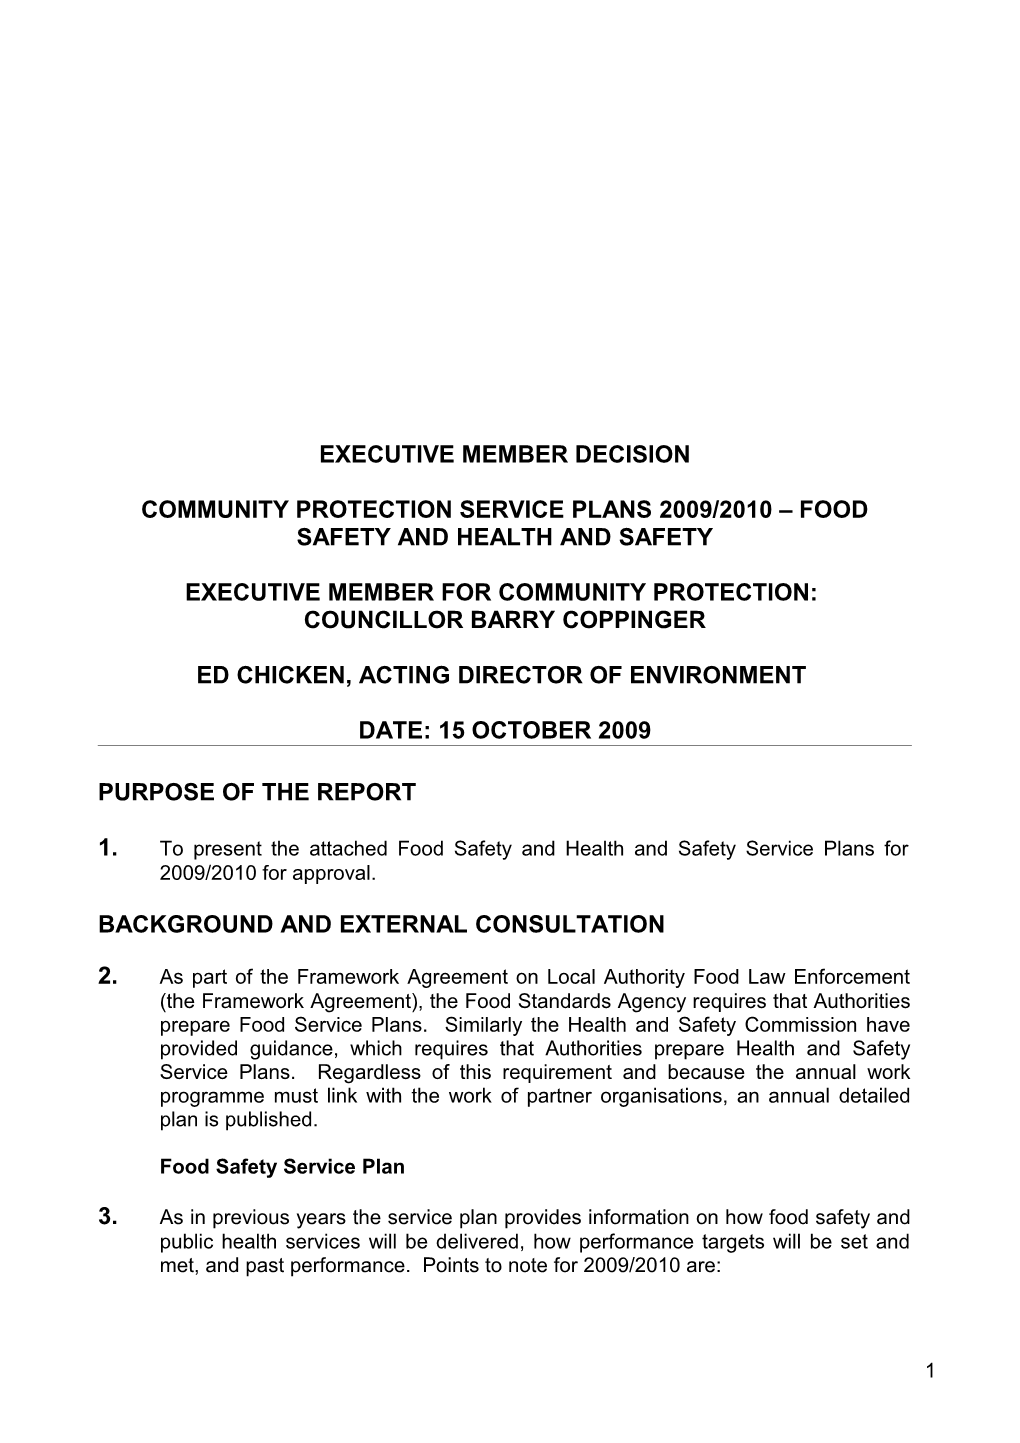 Community Protection Service Plans 2009/2010 Food Safety and Health and Safety